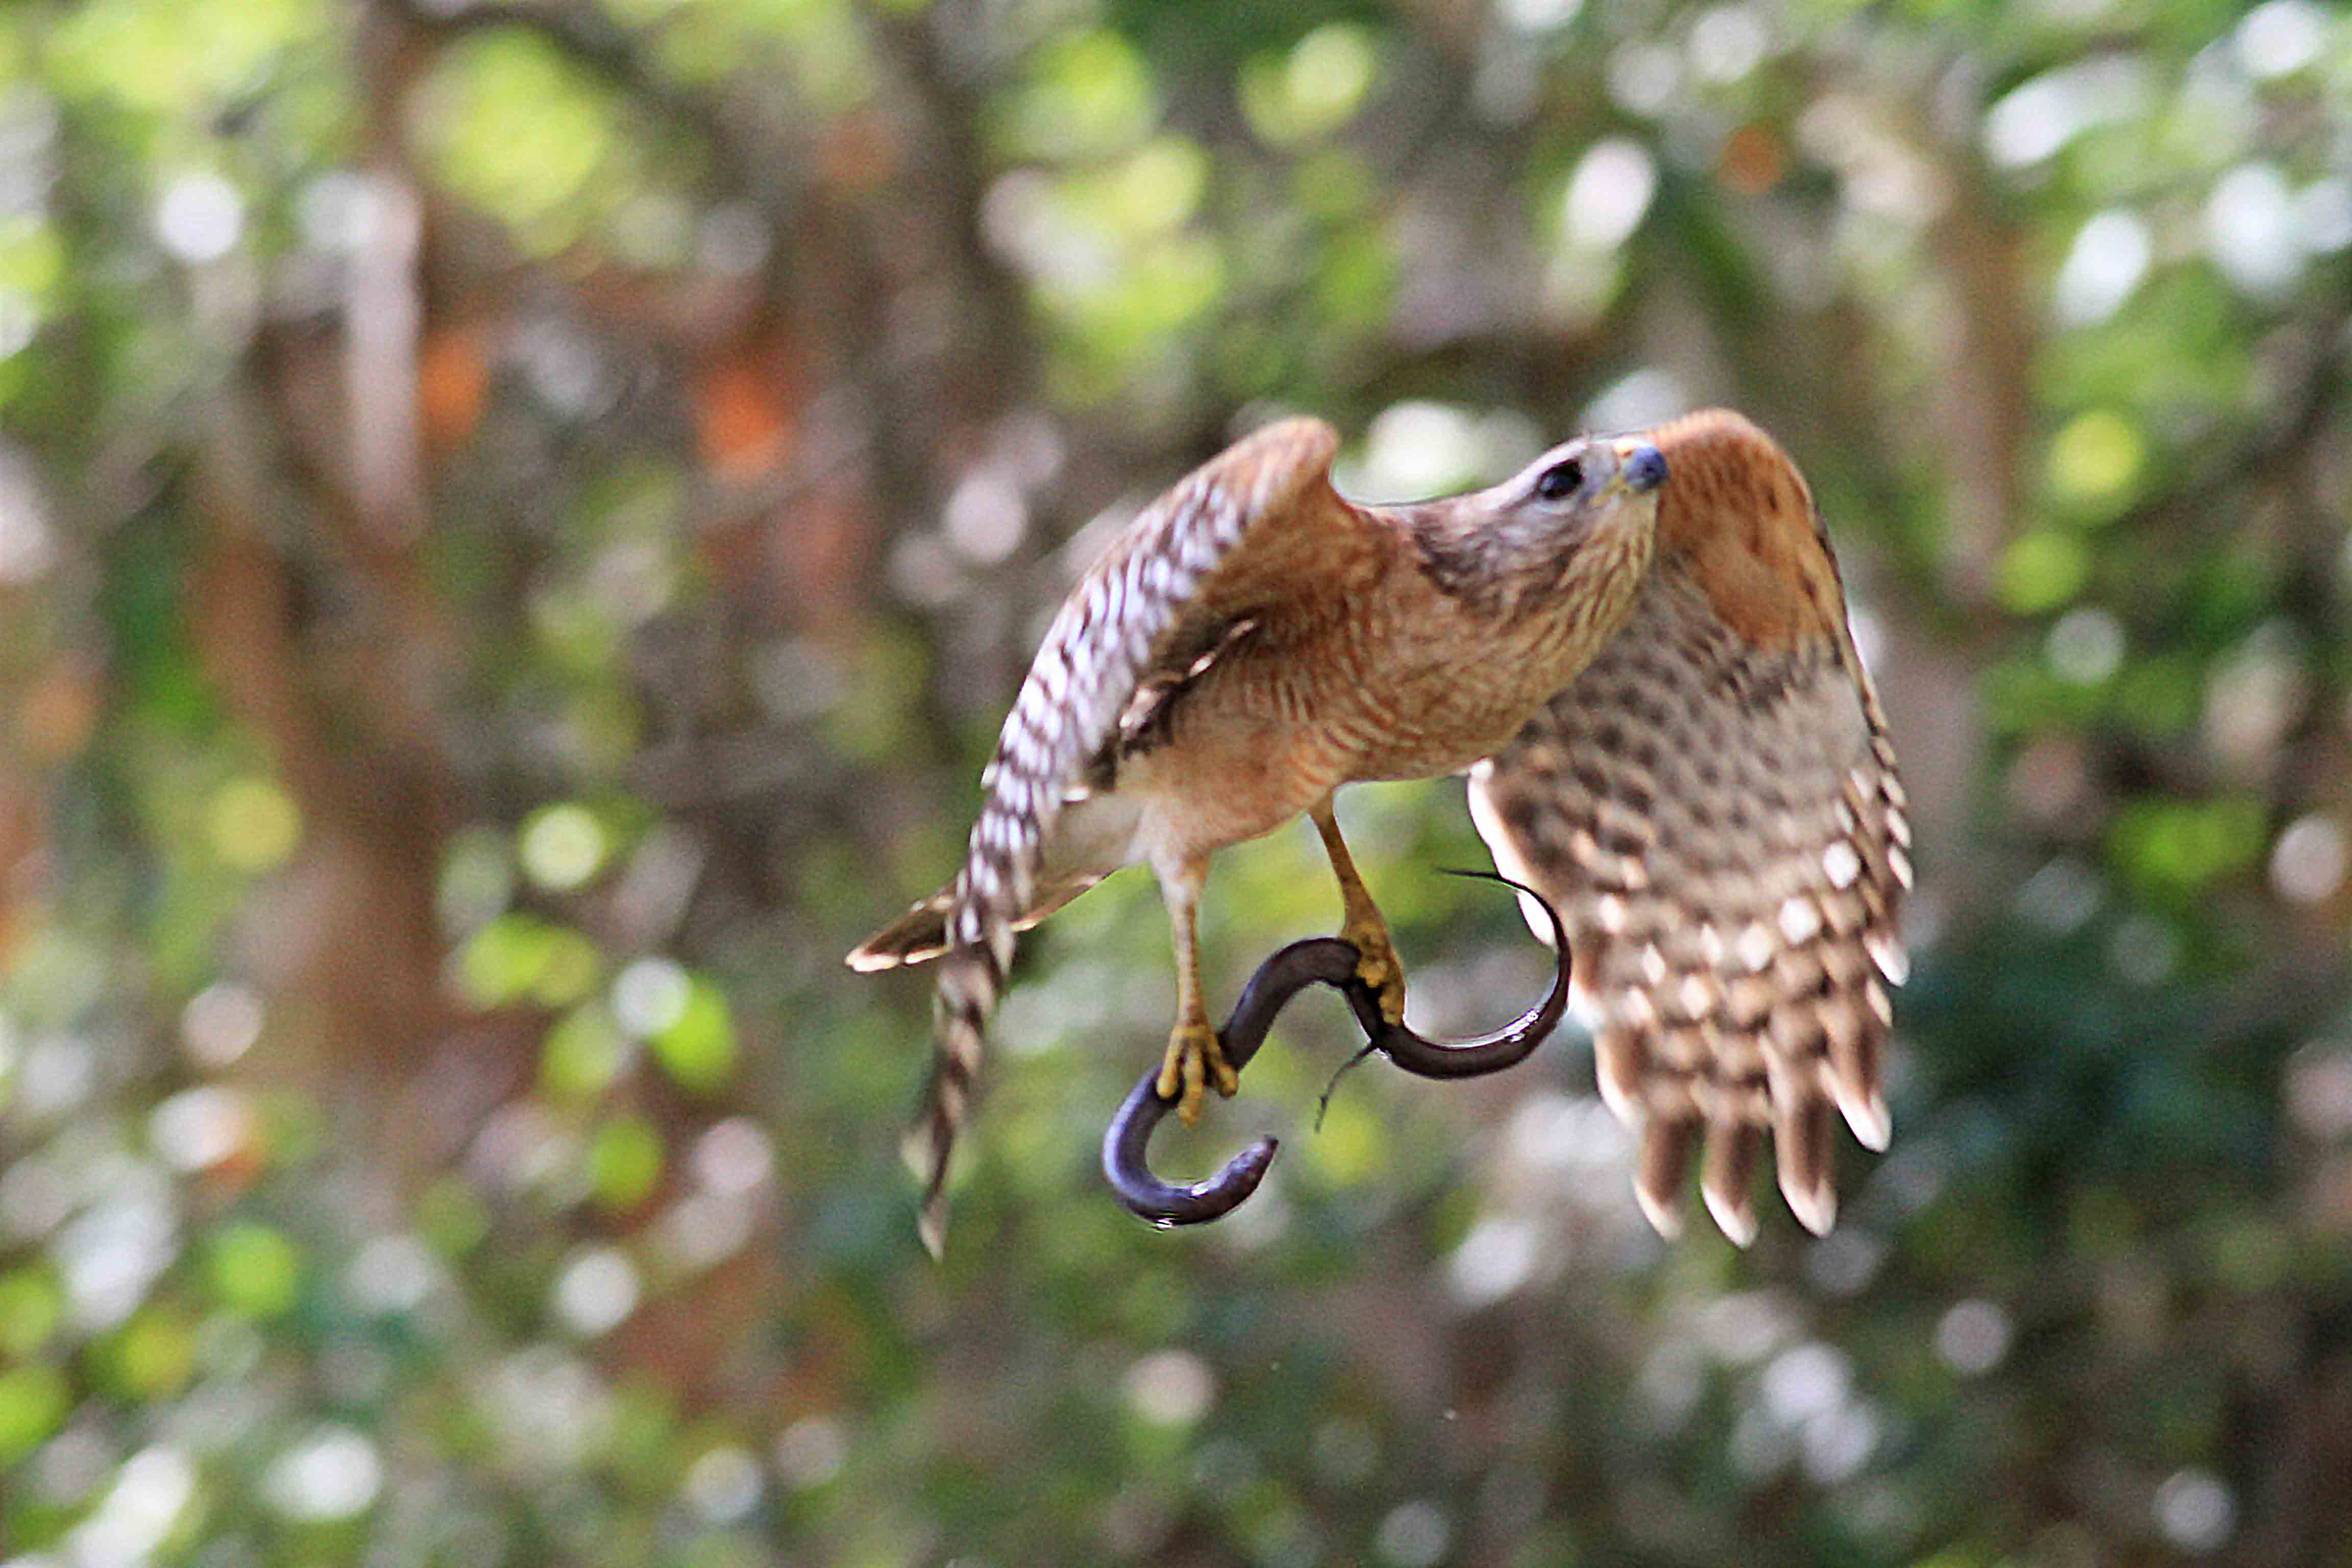 Food Fight! White Ibis vs. Red-shouldered Hawk - Birding Pictures